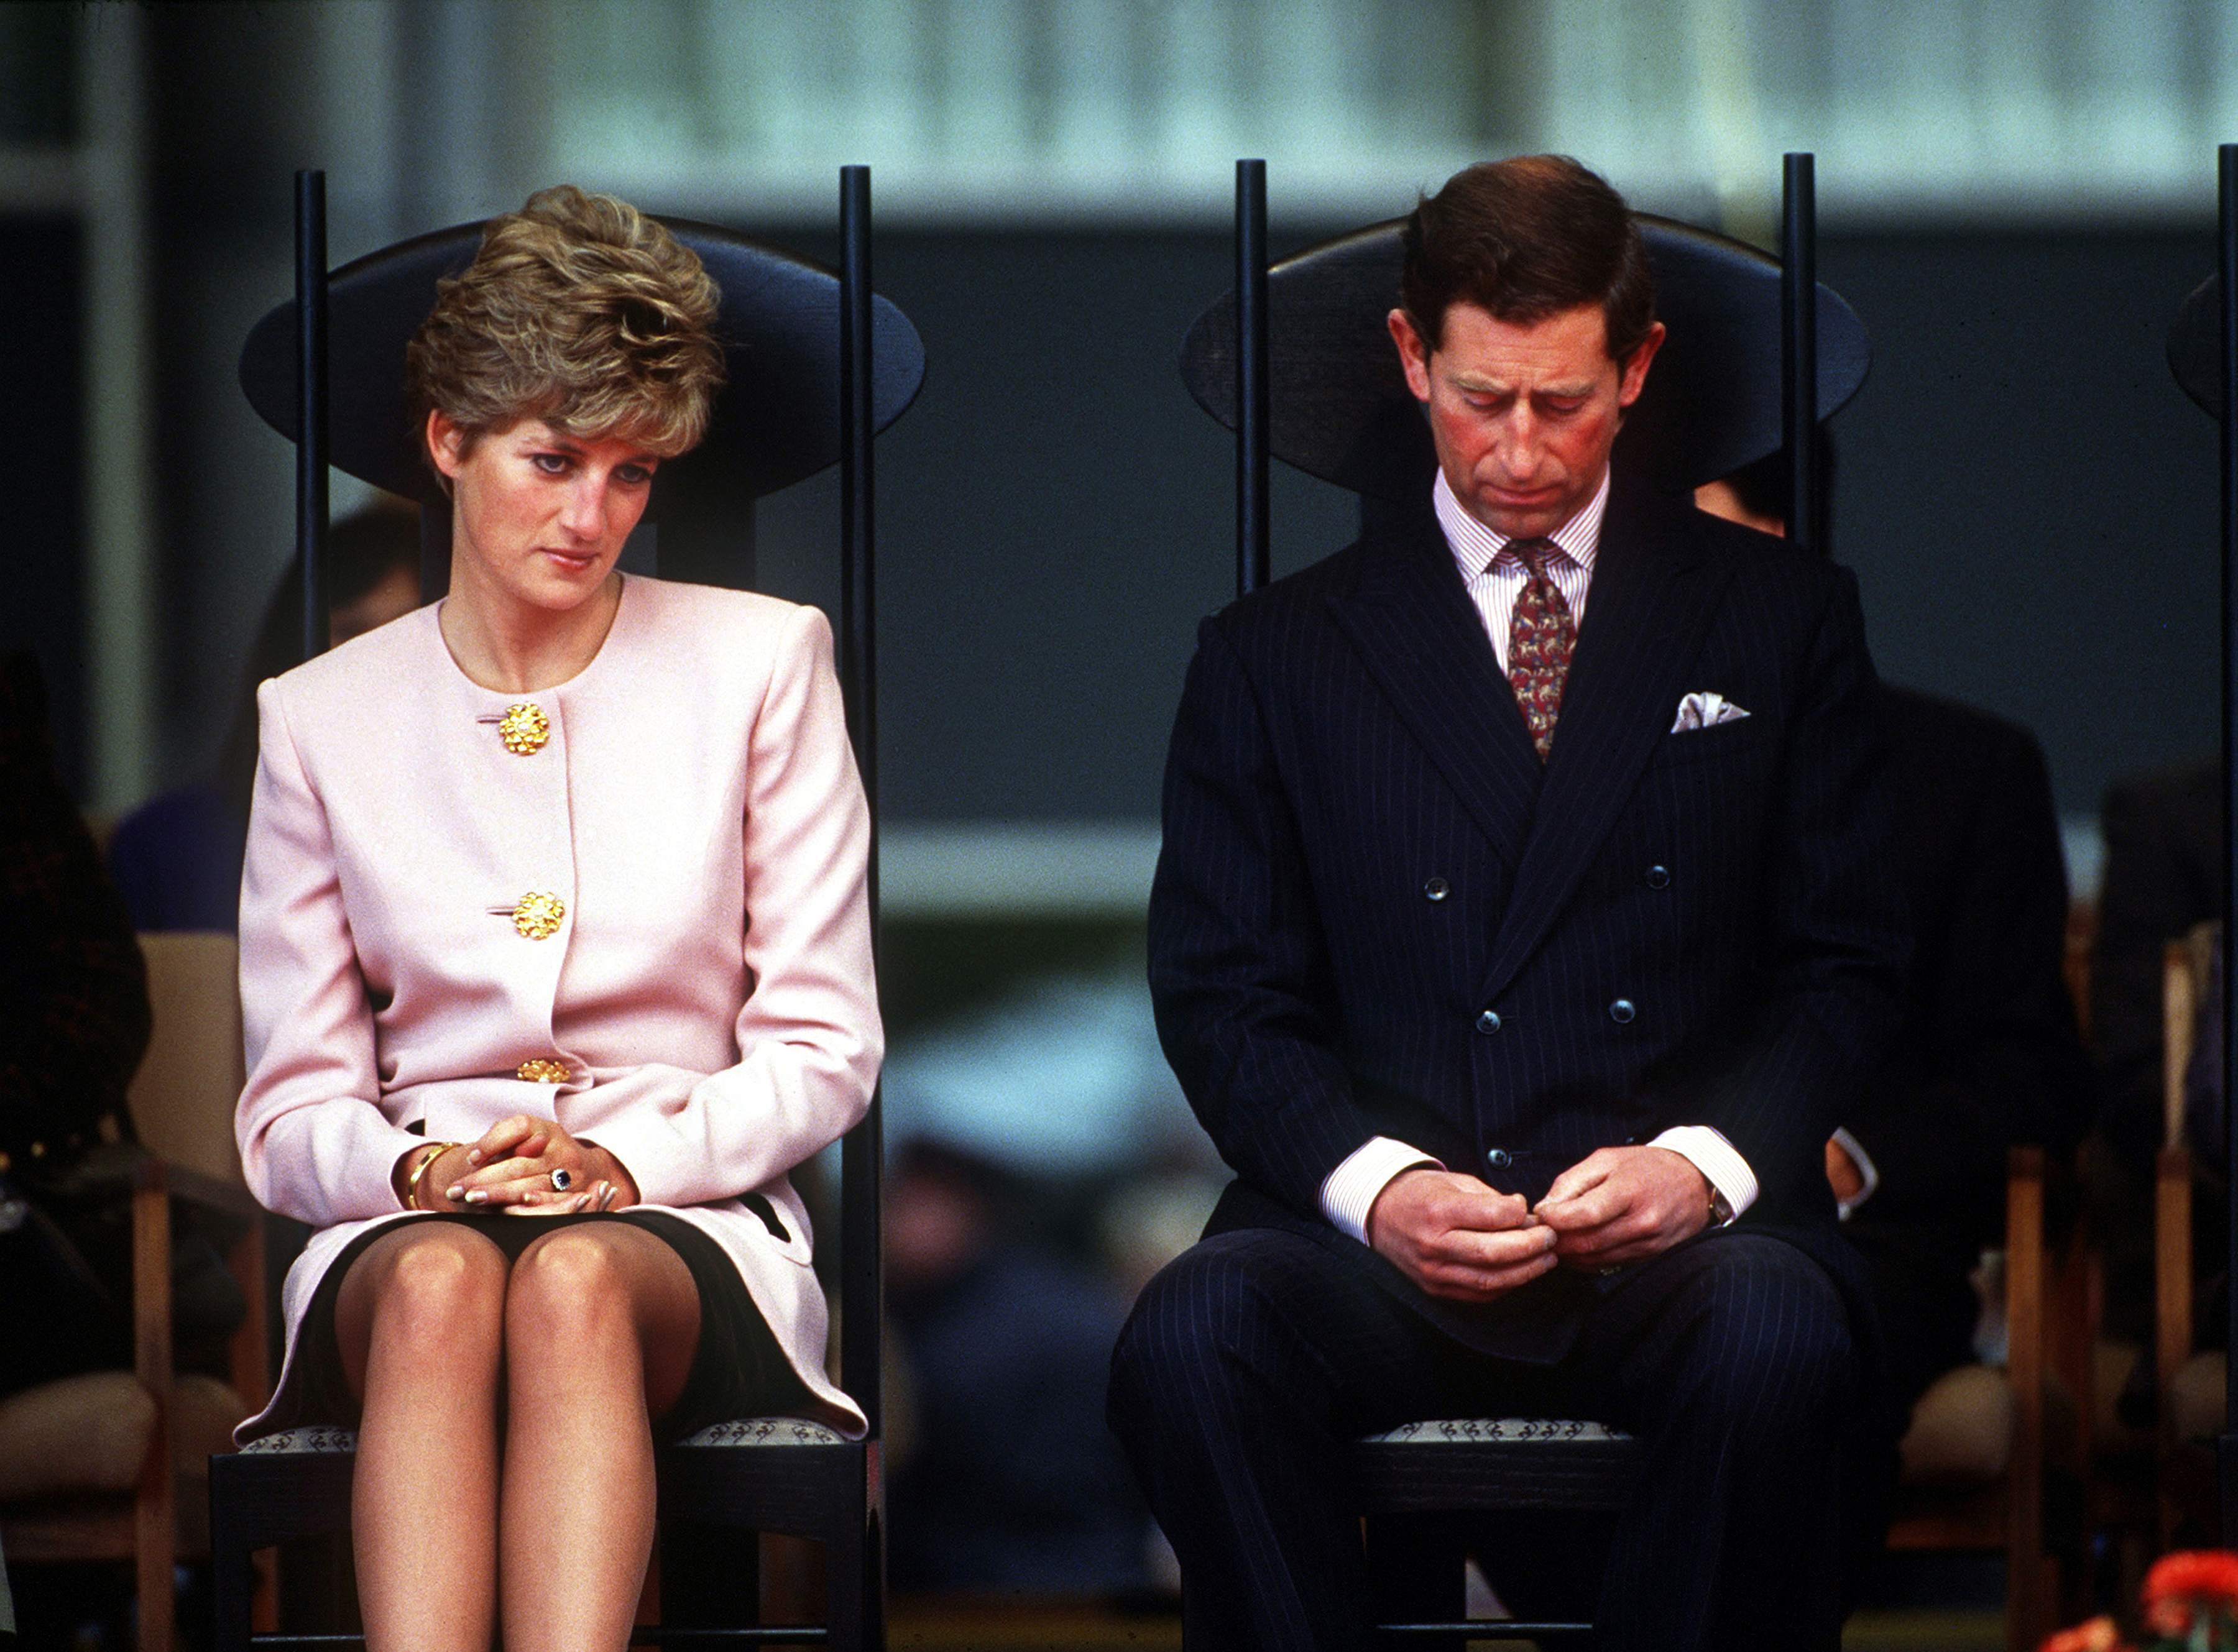 Princess Diana and King Charles III during their Canadian tour in Toronto, Canada in October 1991 | Source: Getty Images